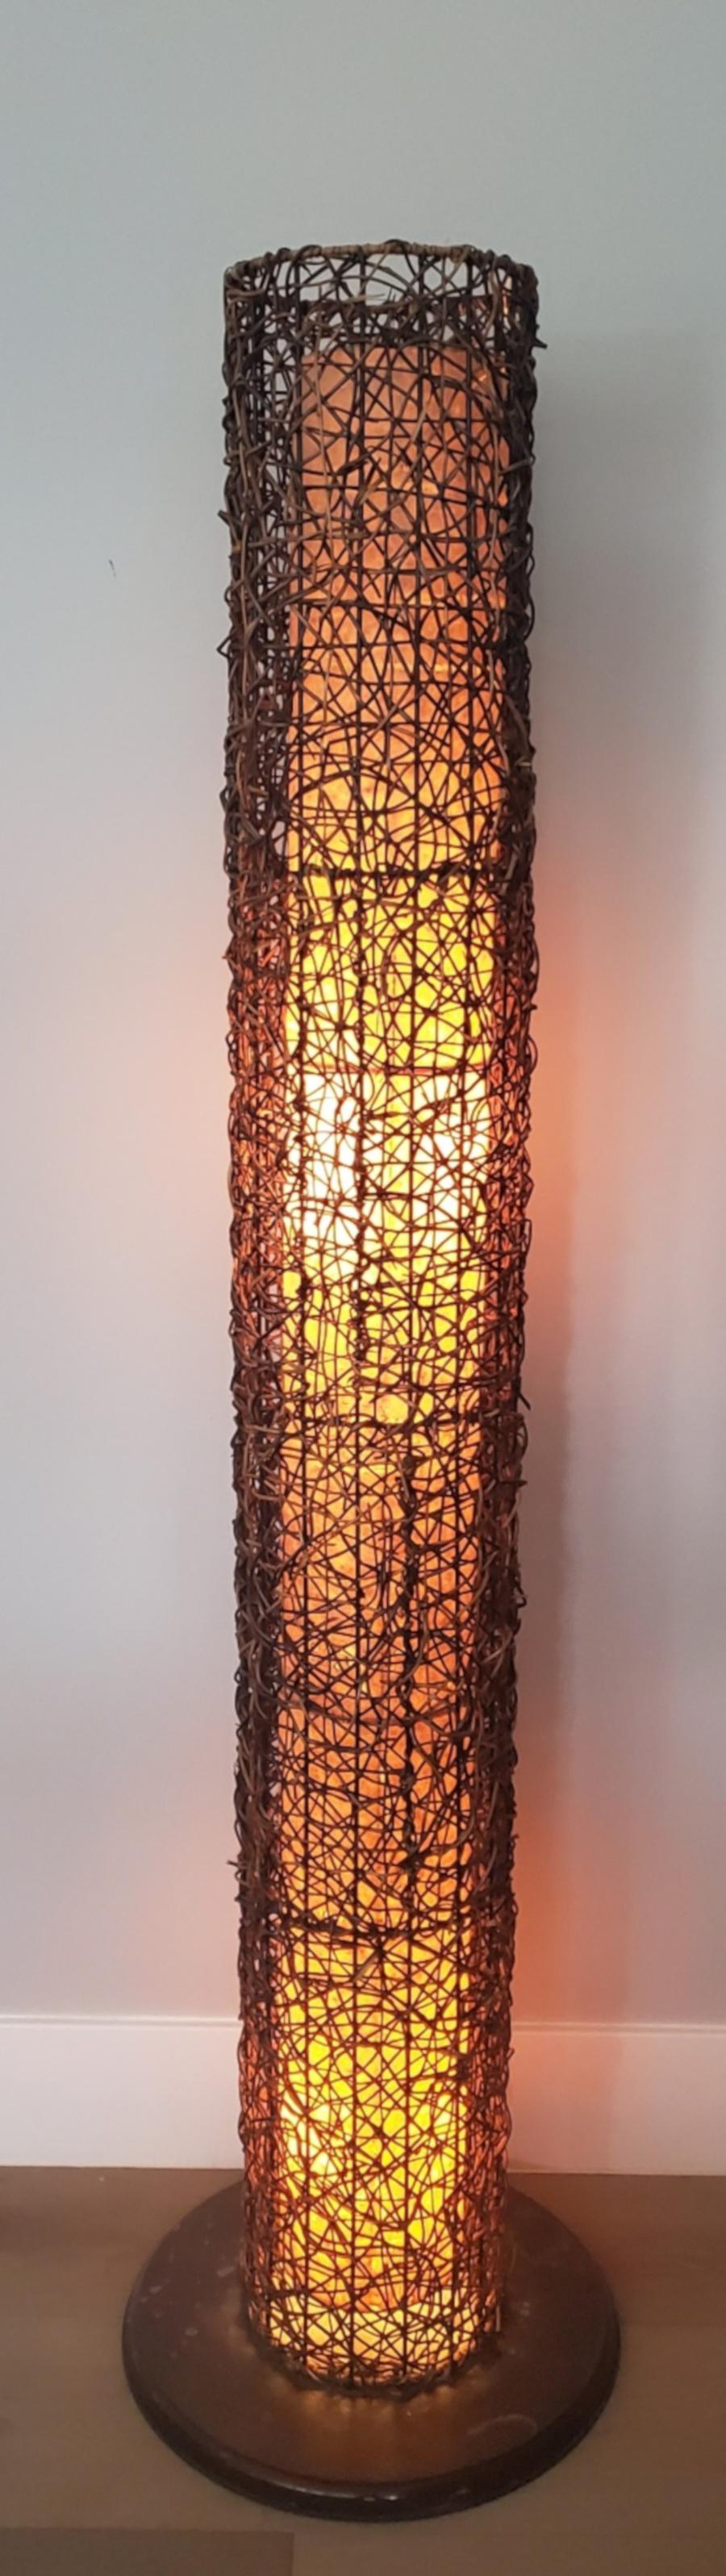 Pair of tall cylindrical rattan and fiber glass floor lamp. Beautiful natural glow of light throughout the inner frame.